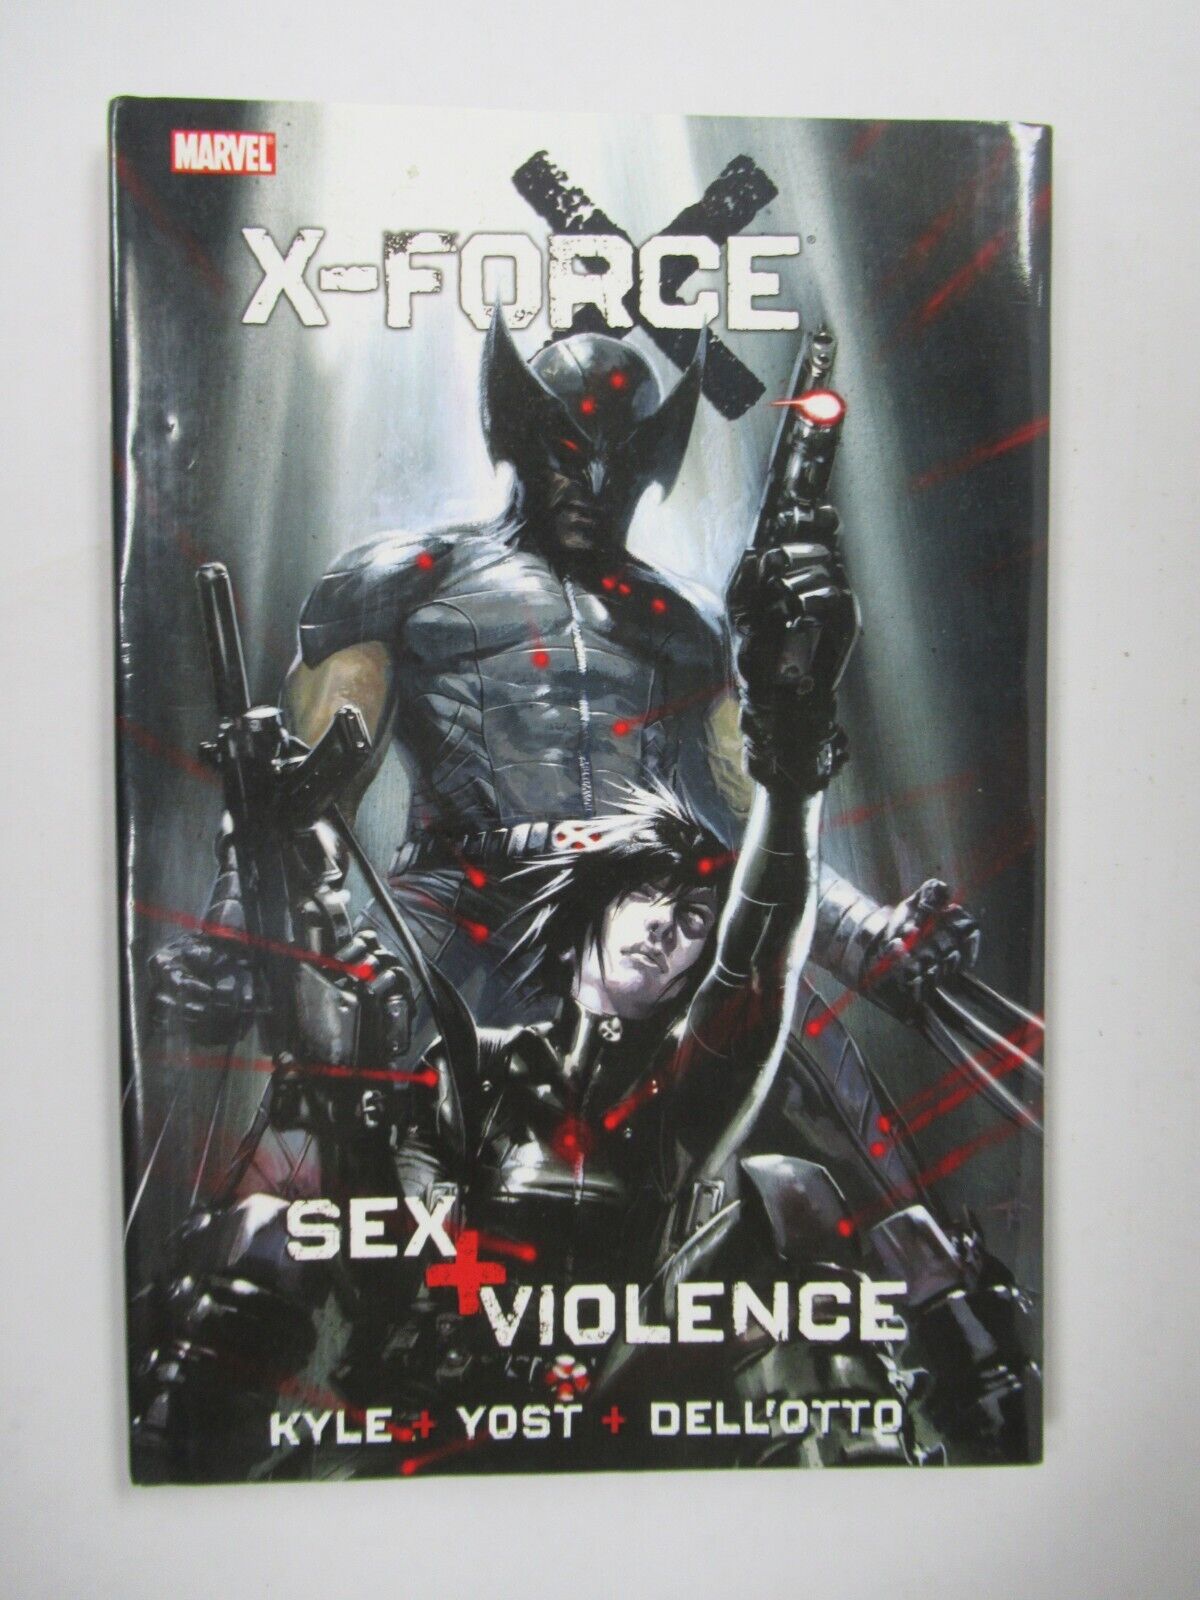 X-Force Sex + Violence Kyle Yost Dell\'otto HC Hardcover